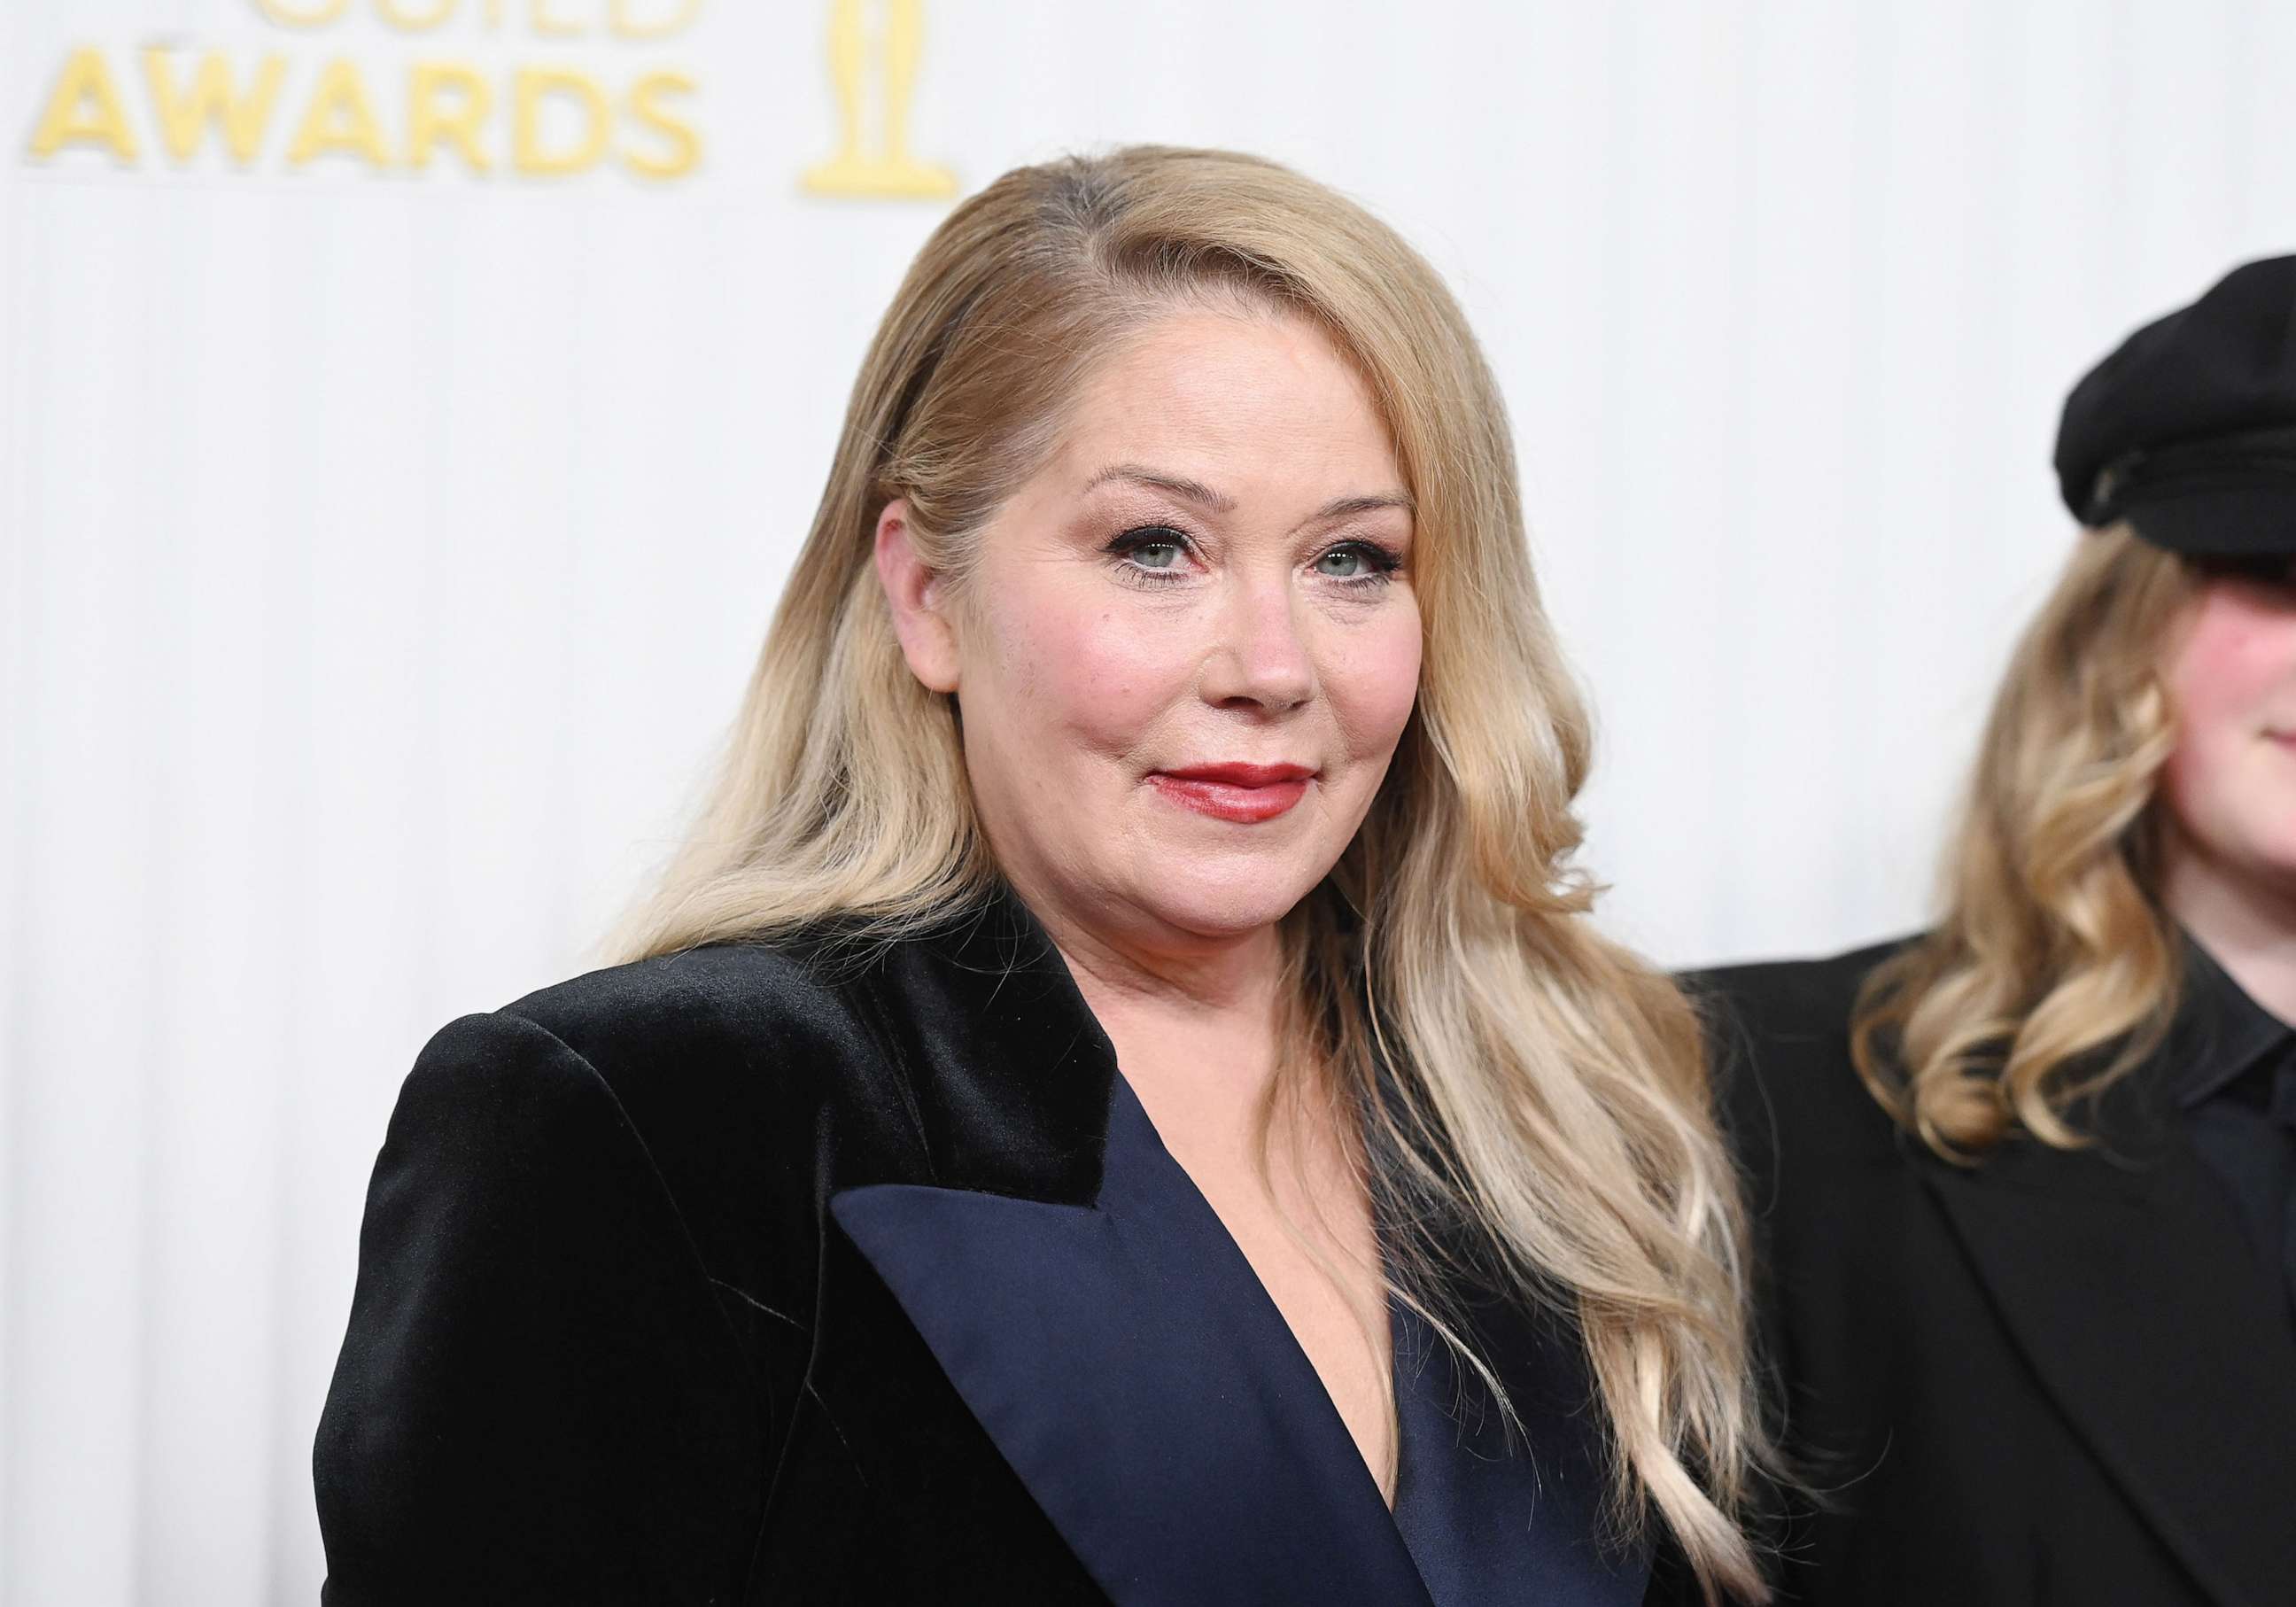 Christina Applegate shares how MS has affected her life 'It’s never a